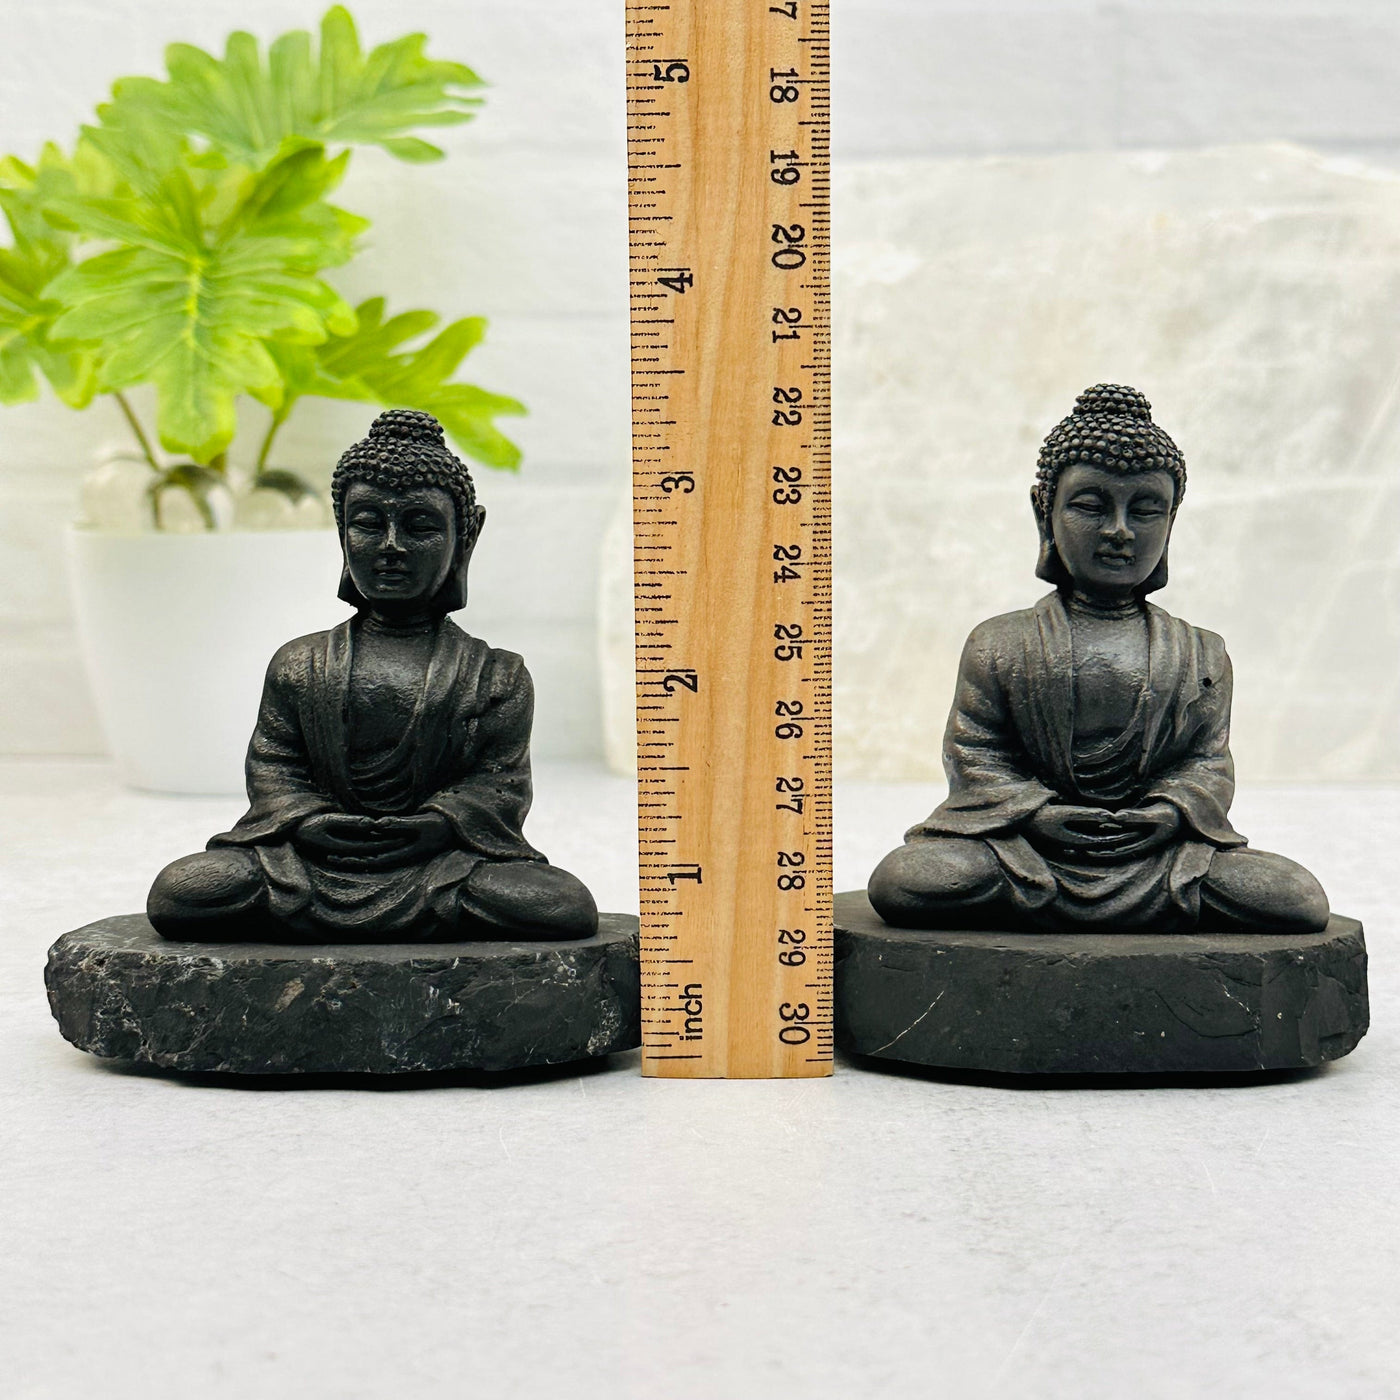 Shungite Sitting Buddha next to a ruler for size reference 